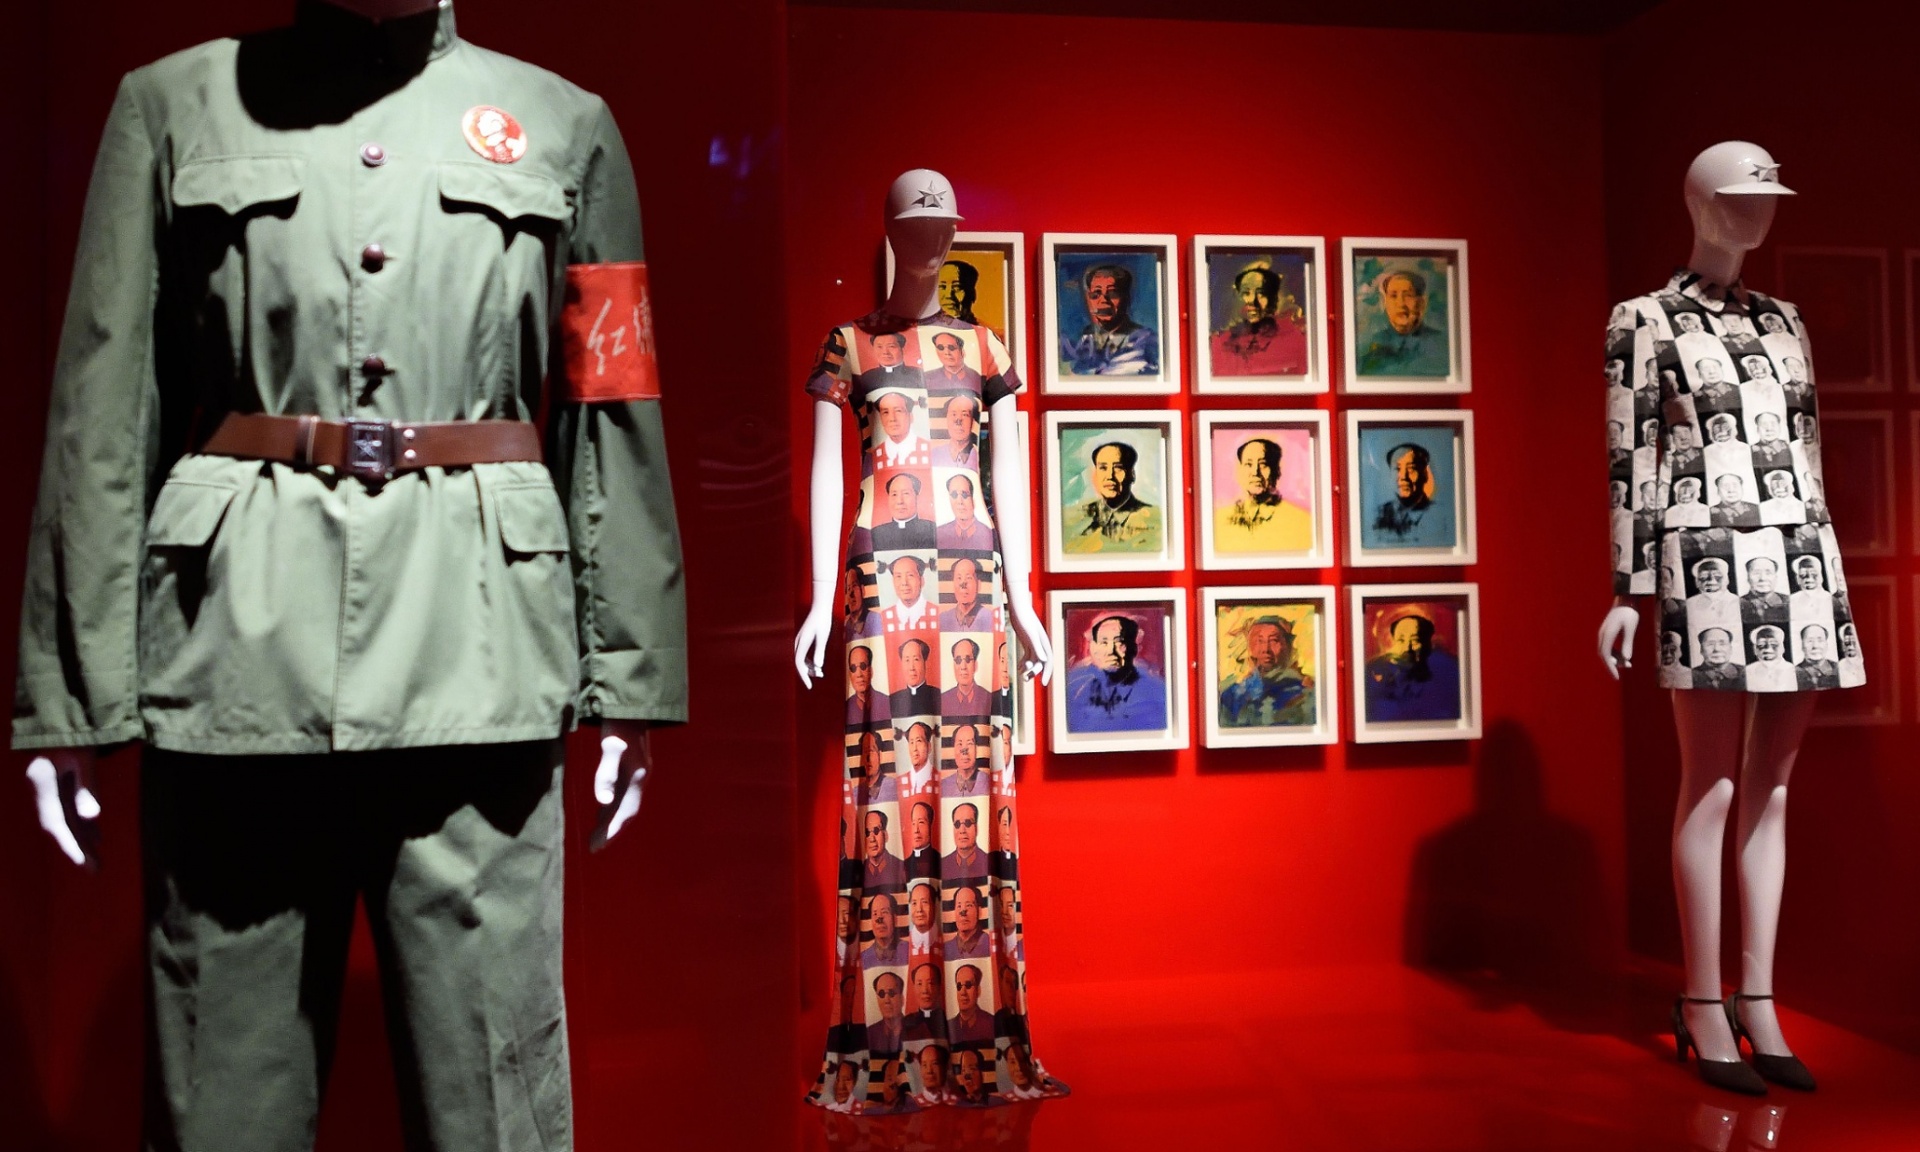 Artwork by Andy Warhol and a dress by Vivienne Tam are displayed as part of the Met’s China Through the Looking Glass. Photograph Don Emmert-getty Images